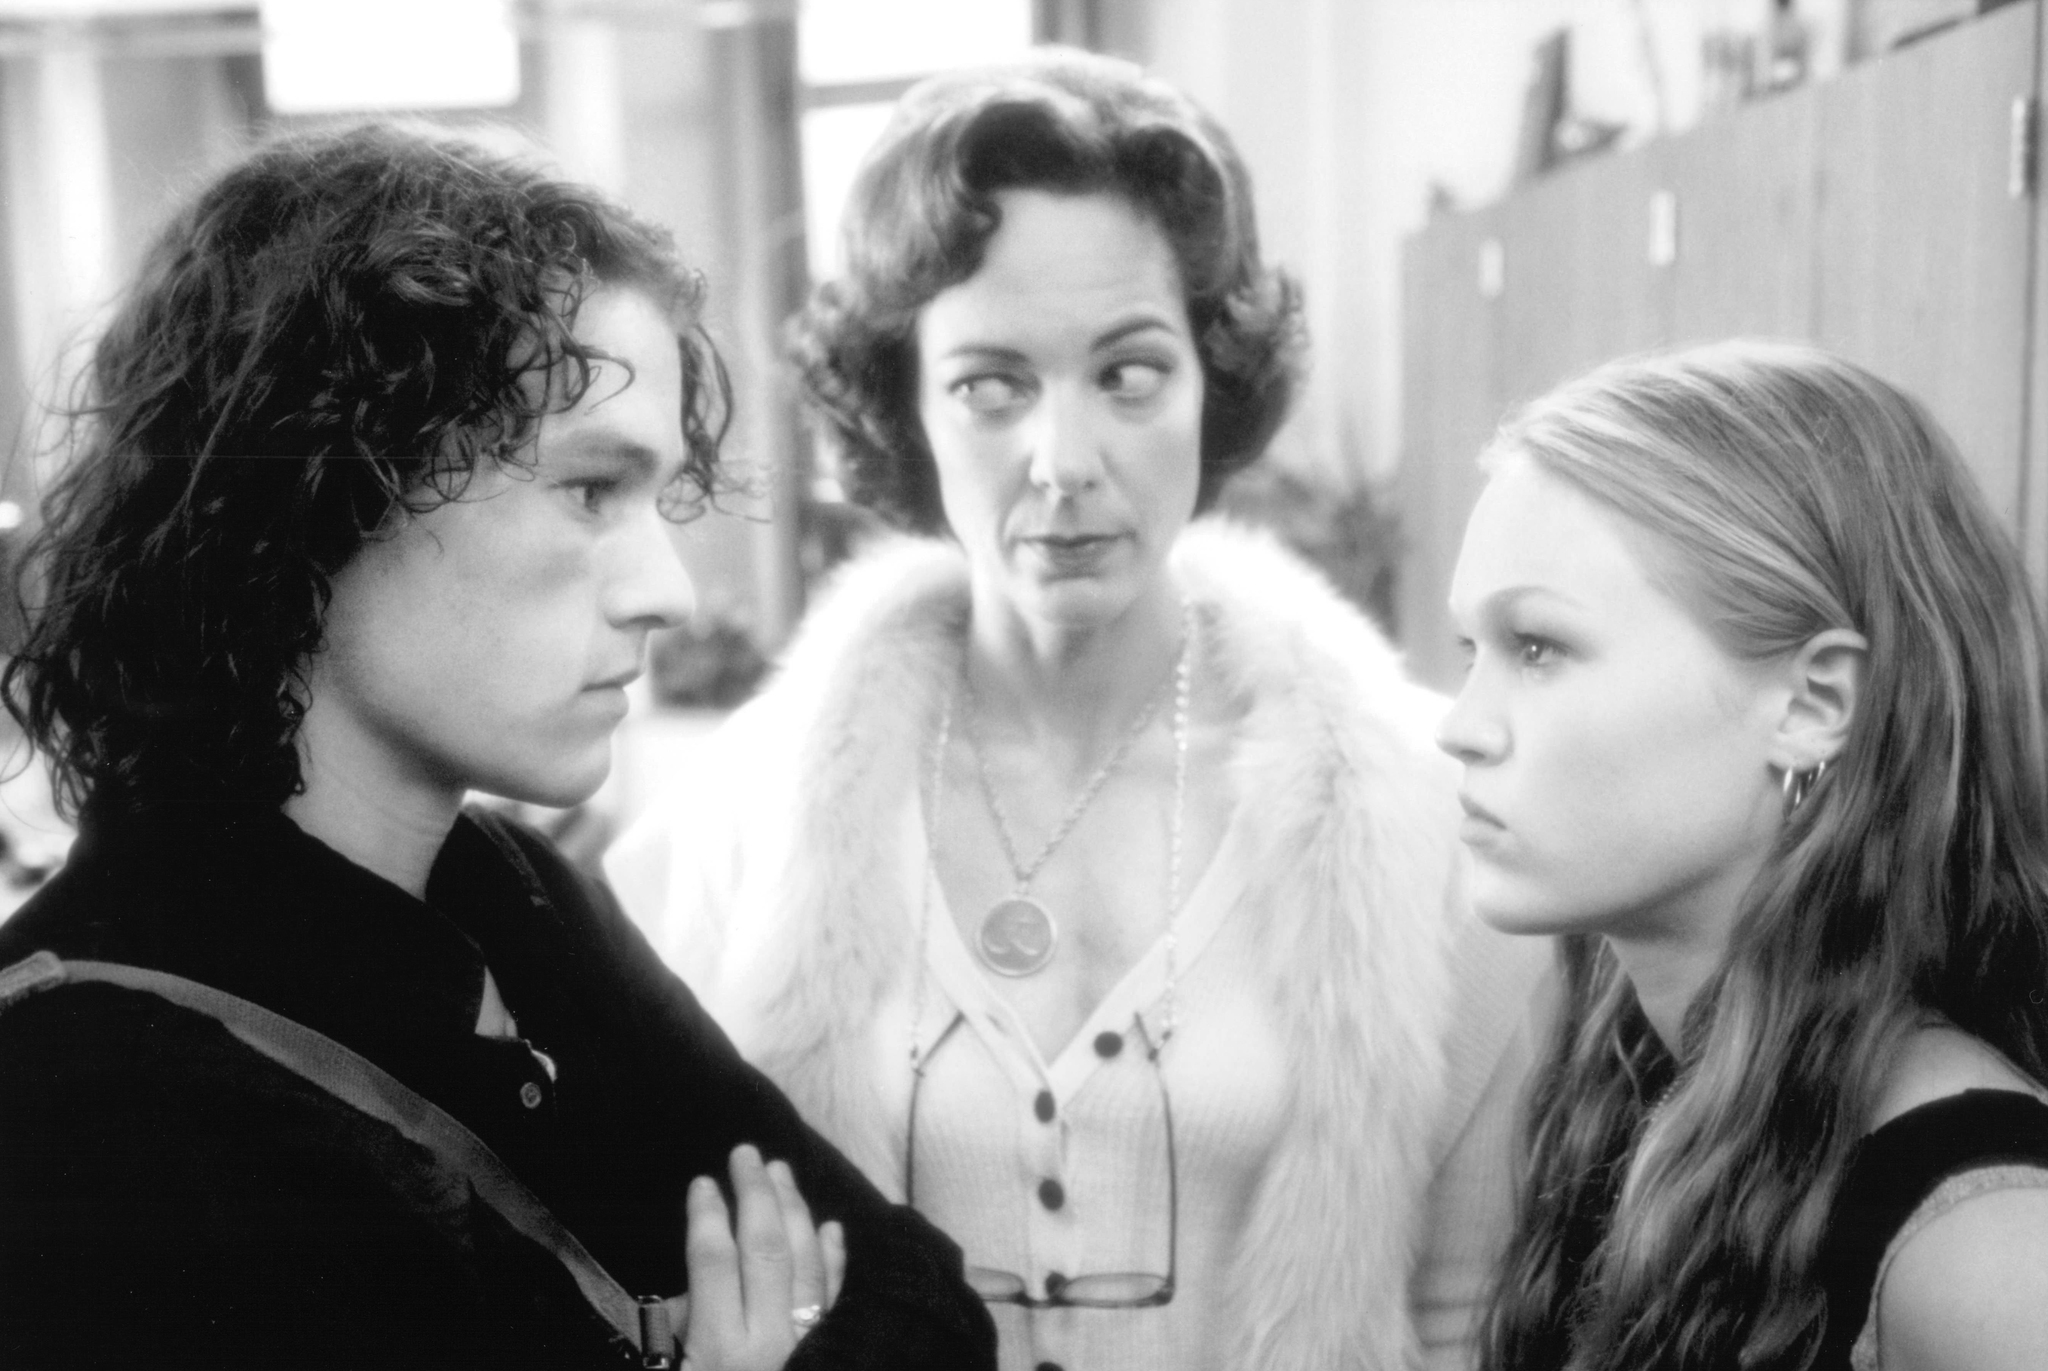 Still of Allison Janney, Heath Ledger and Julia Stiles in 10 Things I Hate About You (1999)